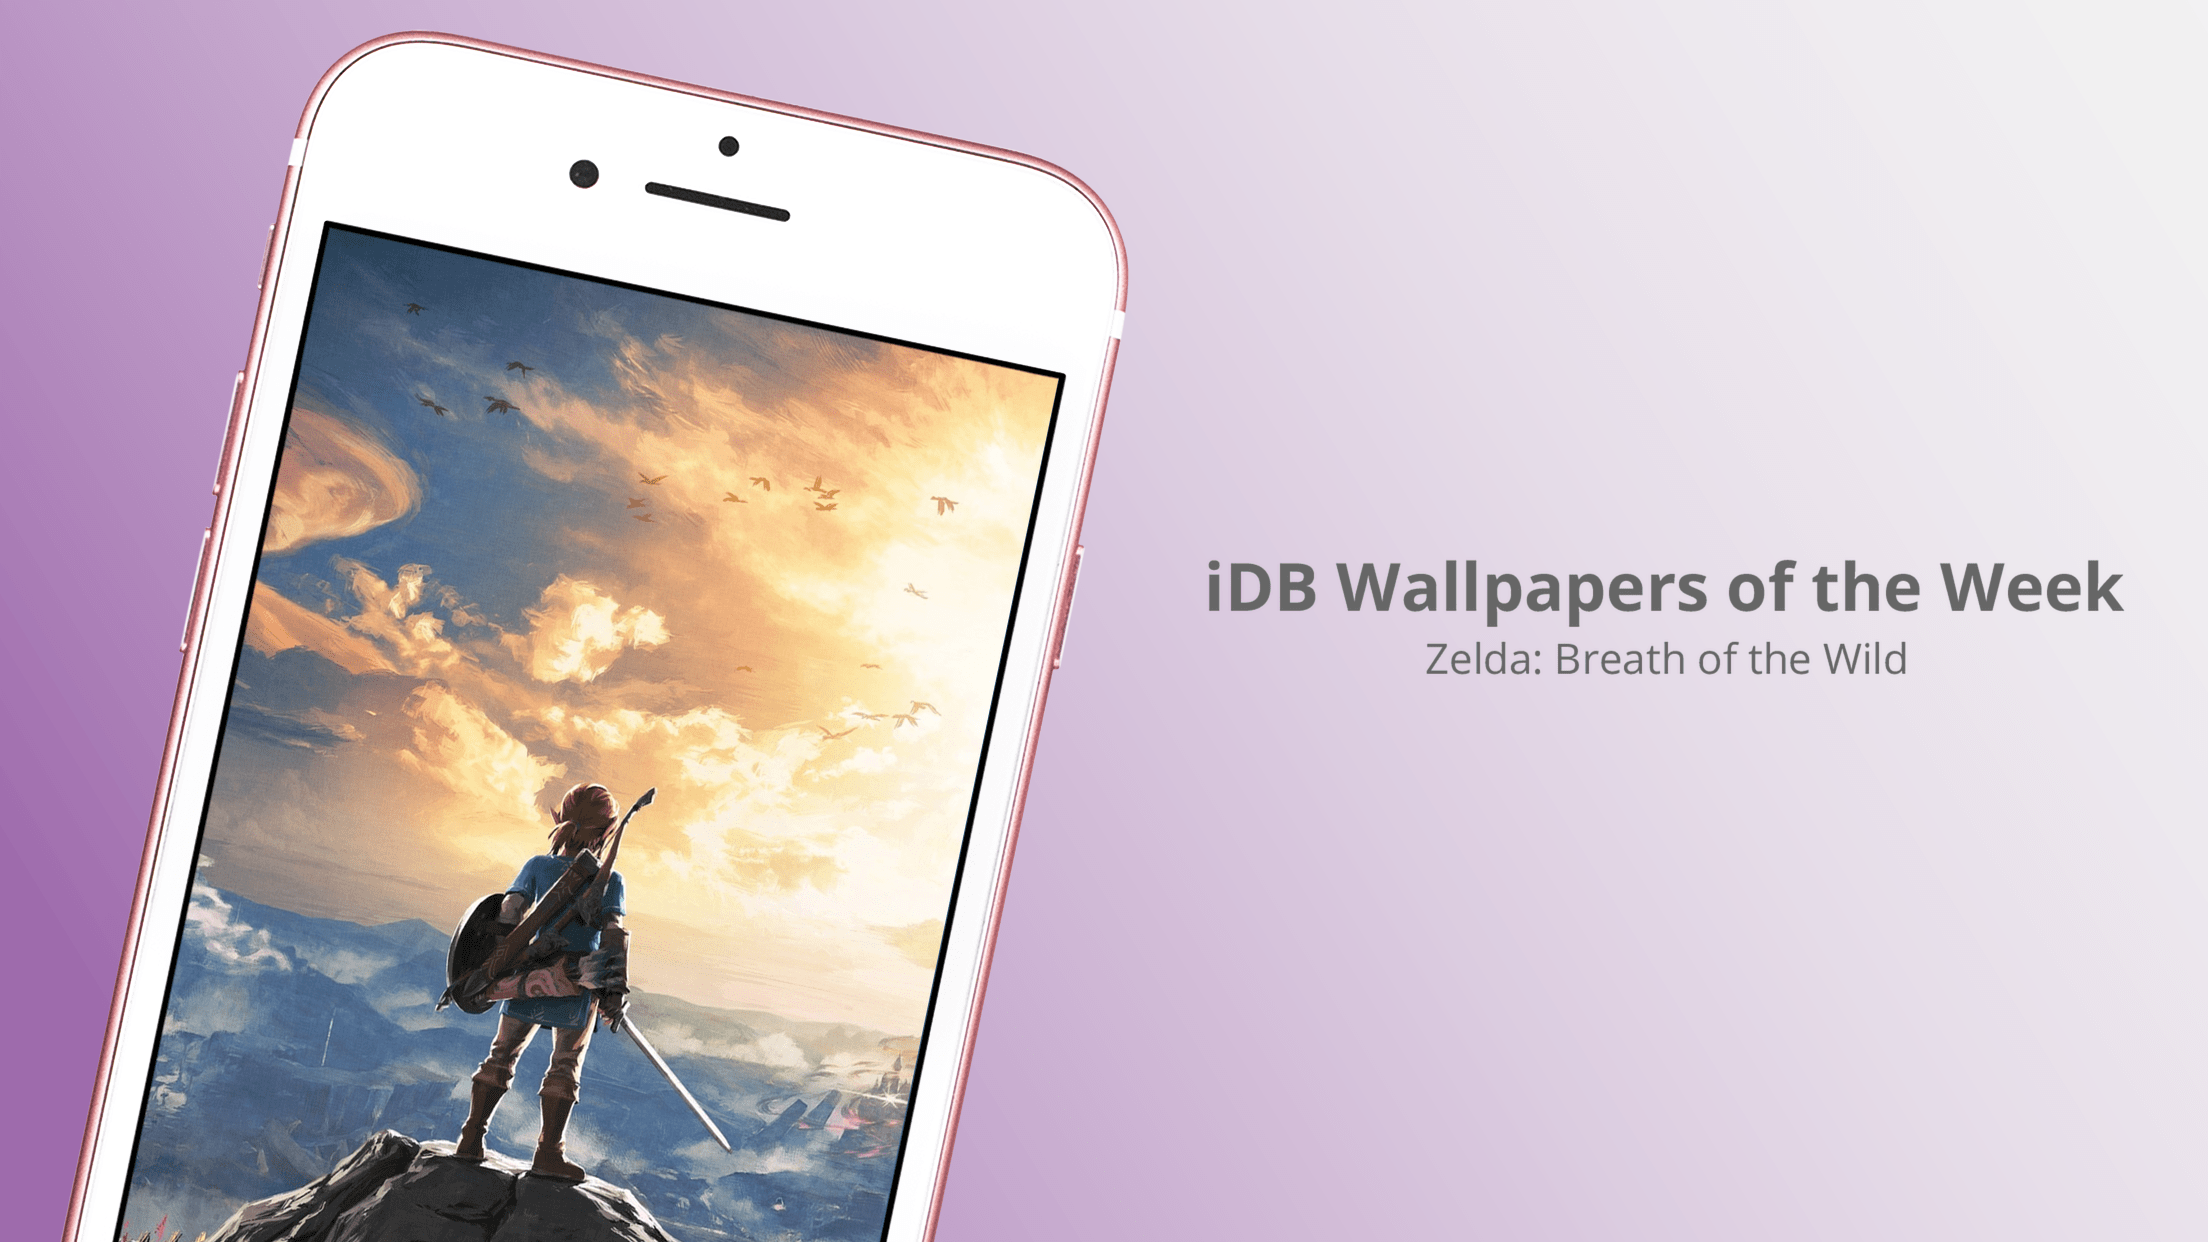 Wallpapers đẹp cho iDevice: Tựa game Zelda: Breath of the Wild